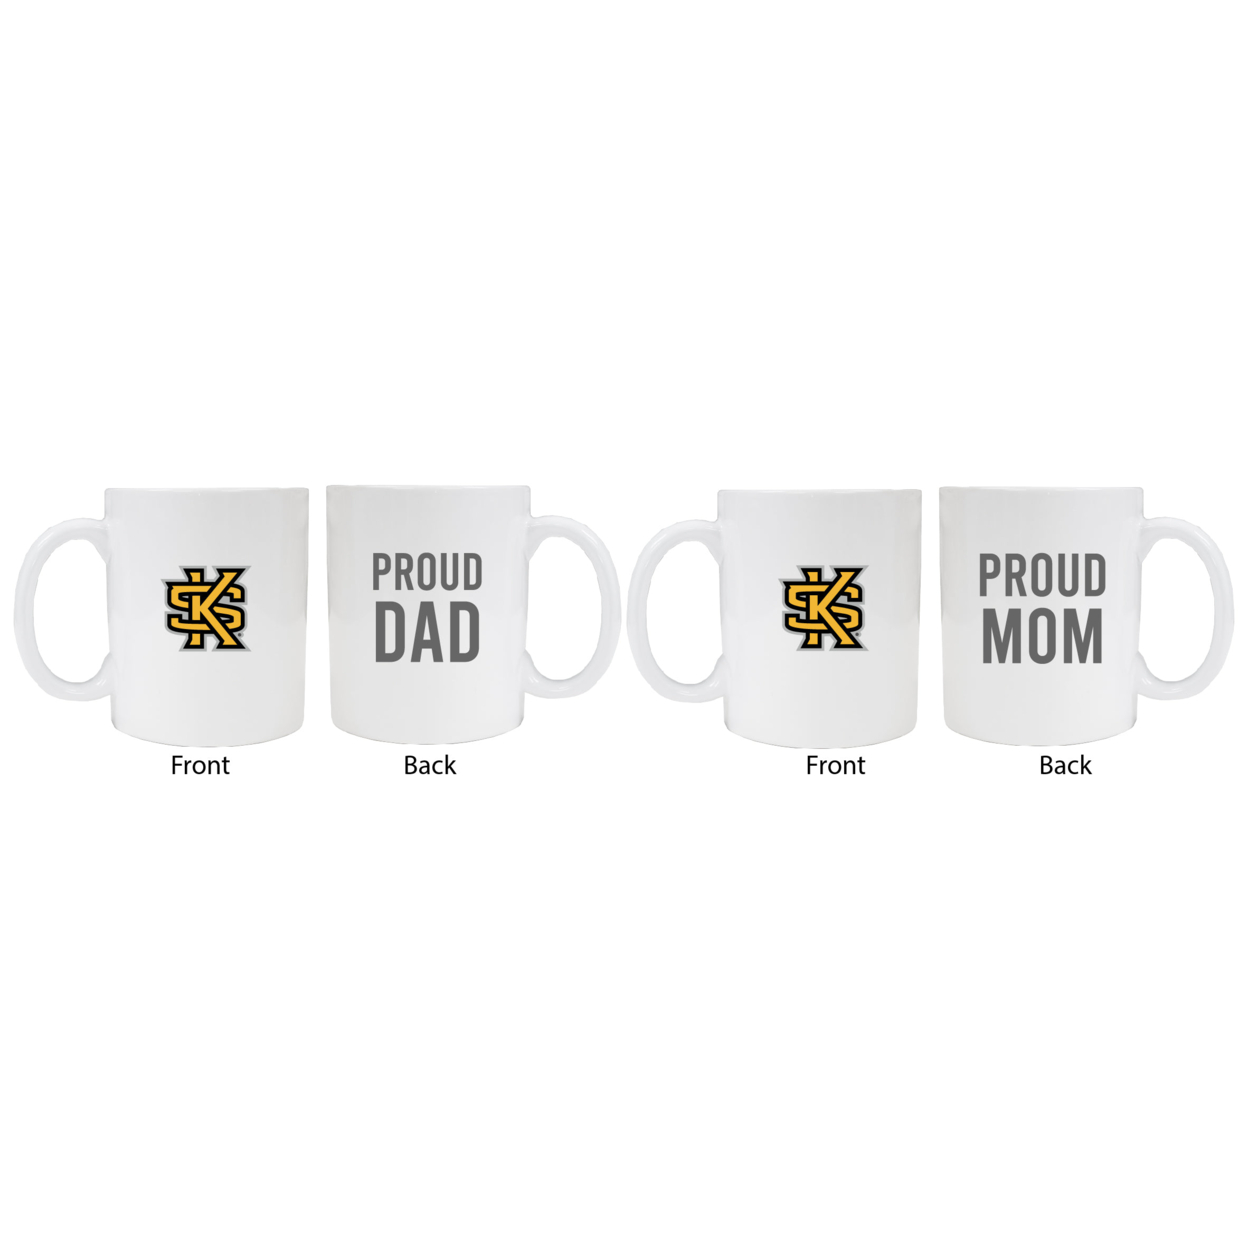 Kennesaw State Unviersity Proud Mom And Dad White Ceramic Coffee Mug 2 Pack (White).